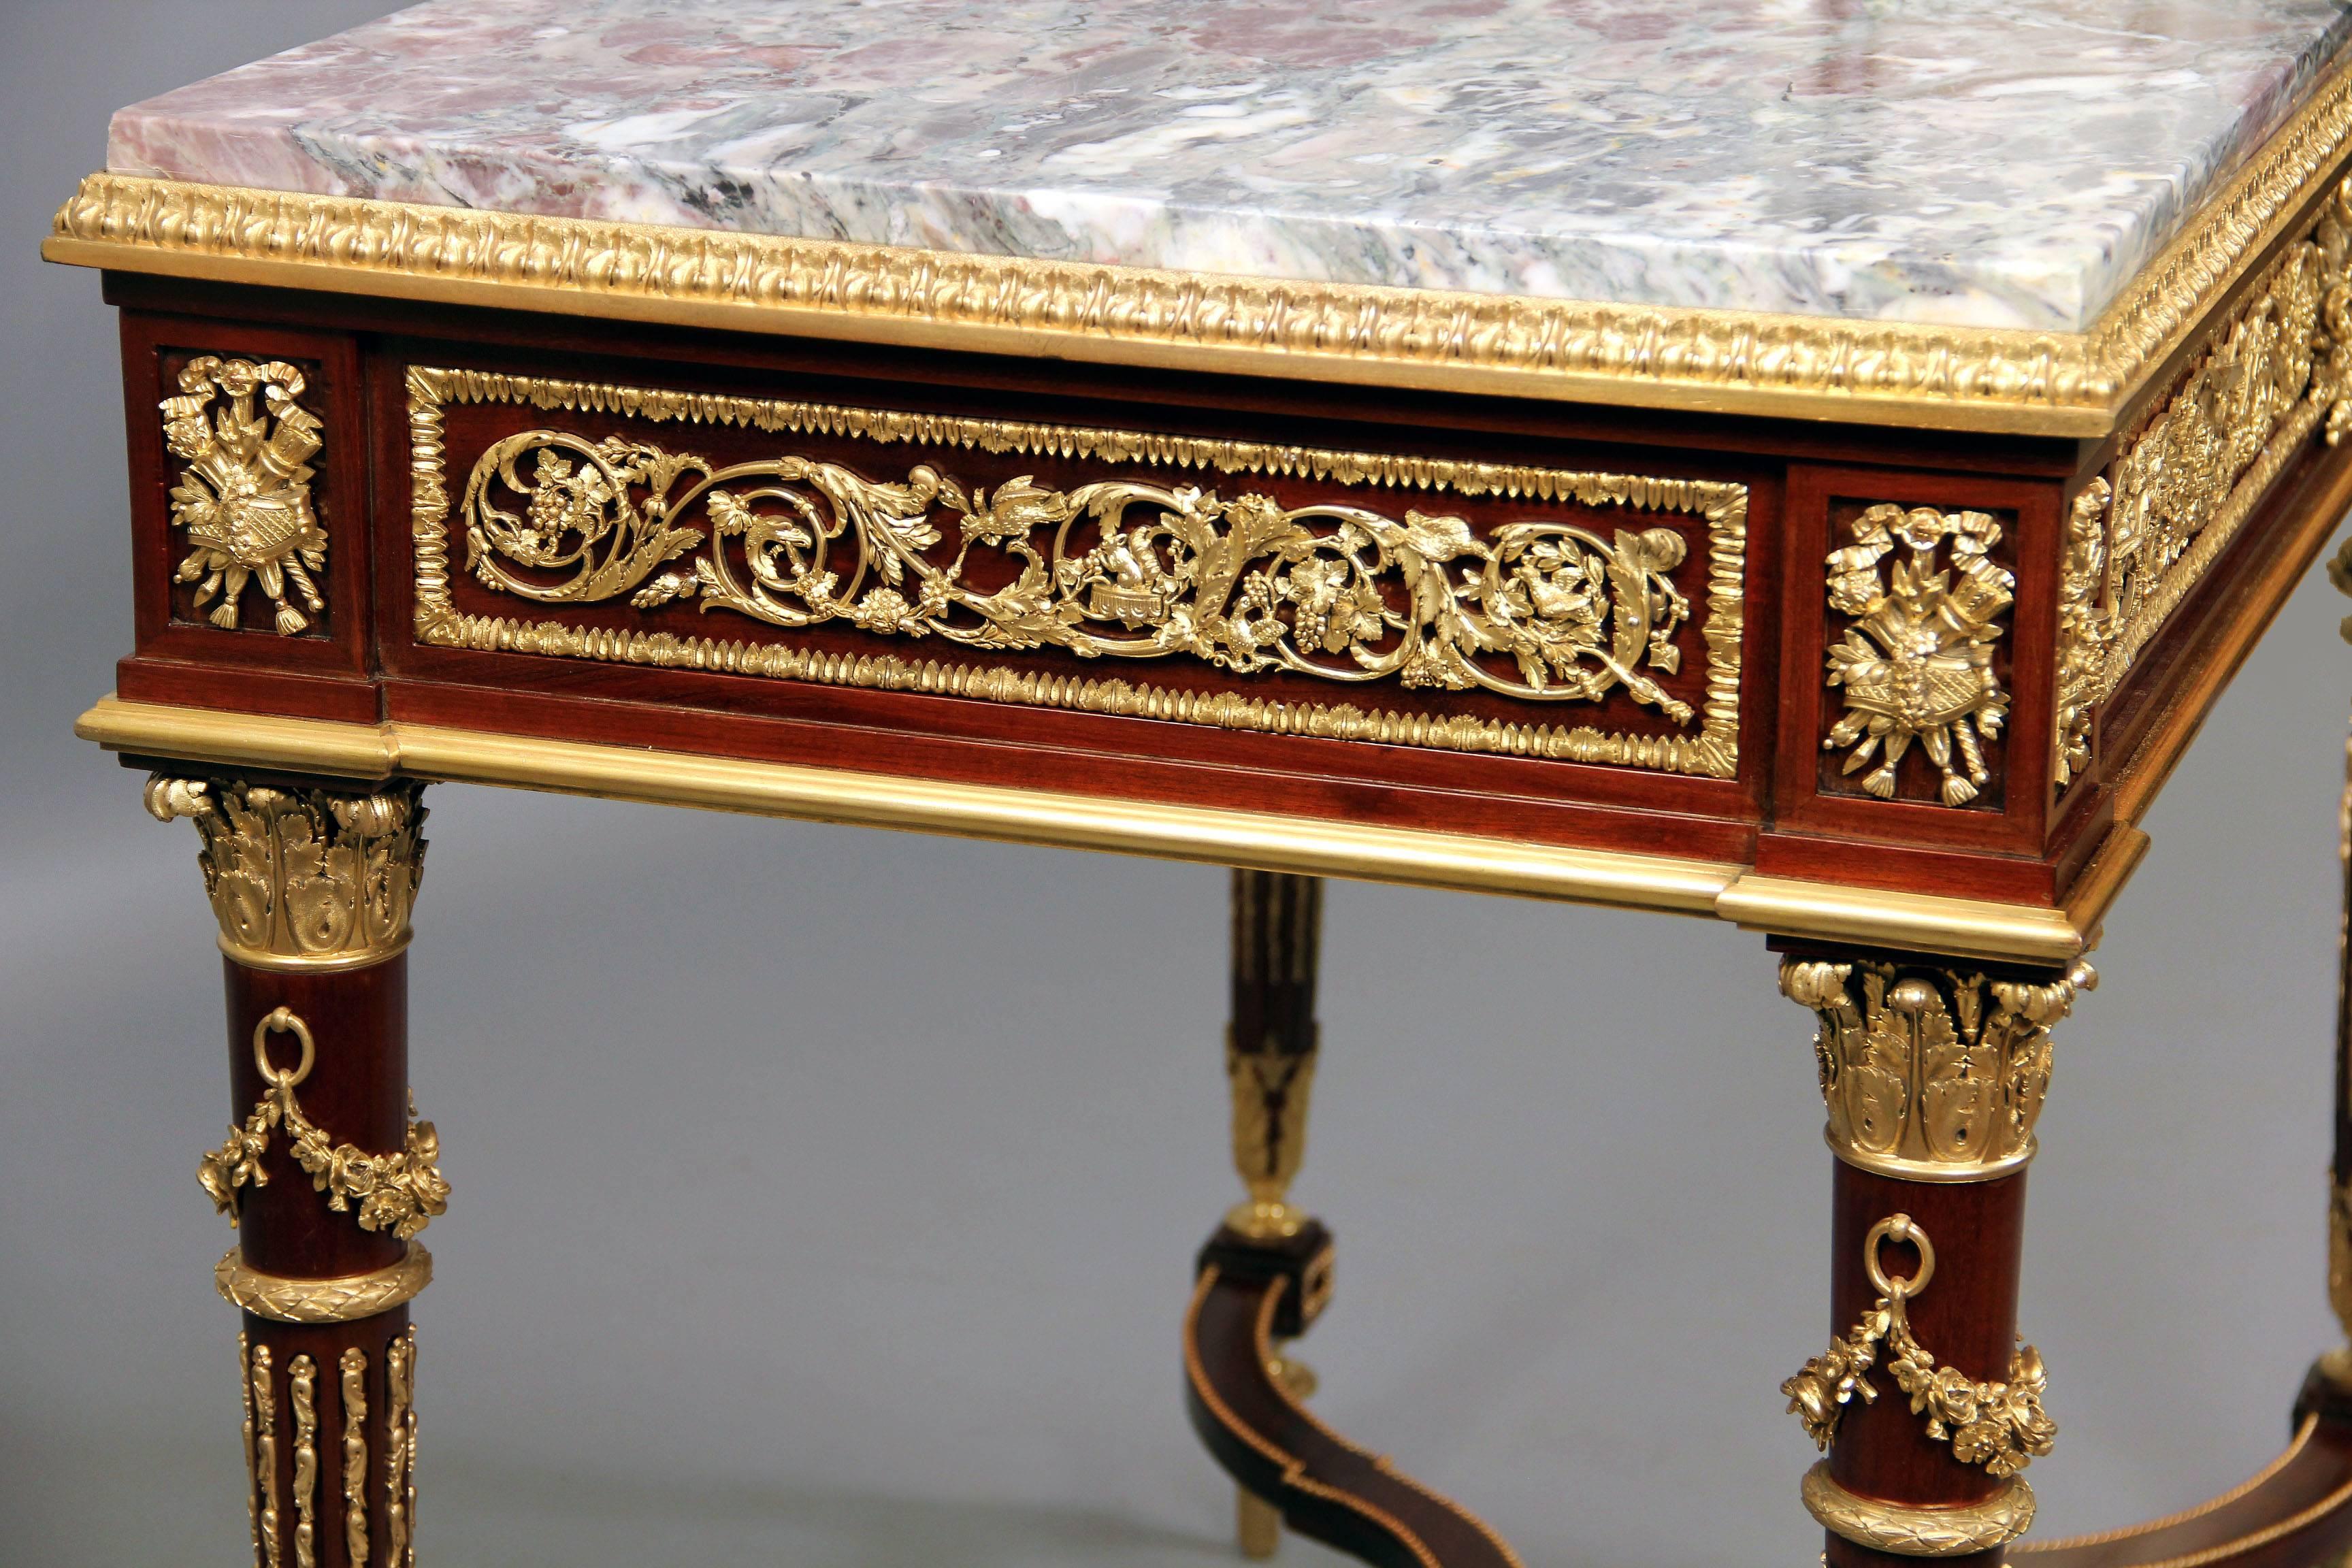 Gilt Fantastic Late 19th Century Bronze-Mounted Center Table by François Linke